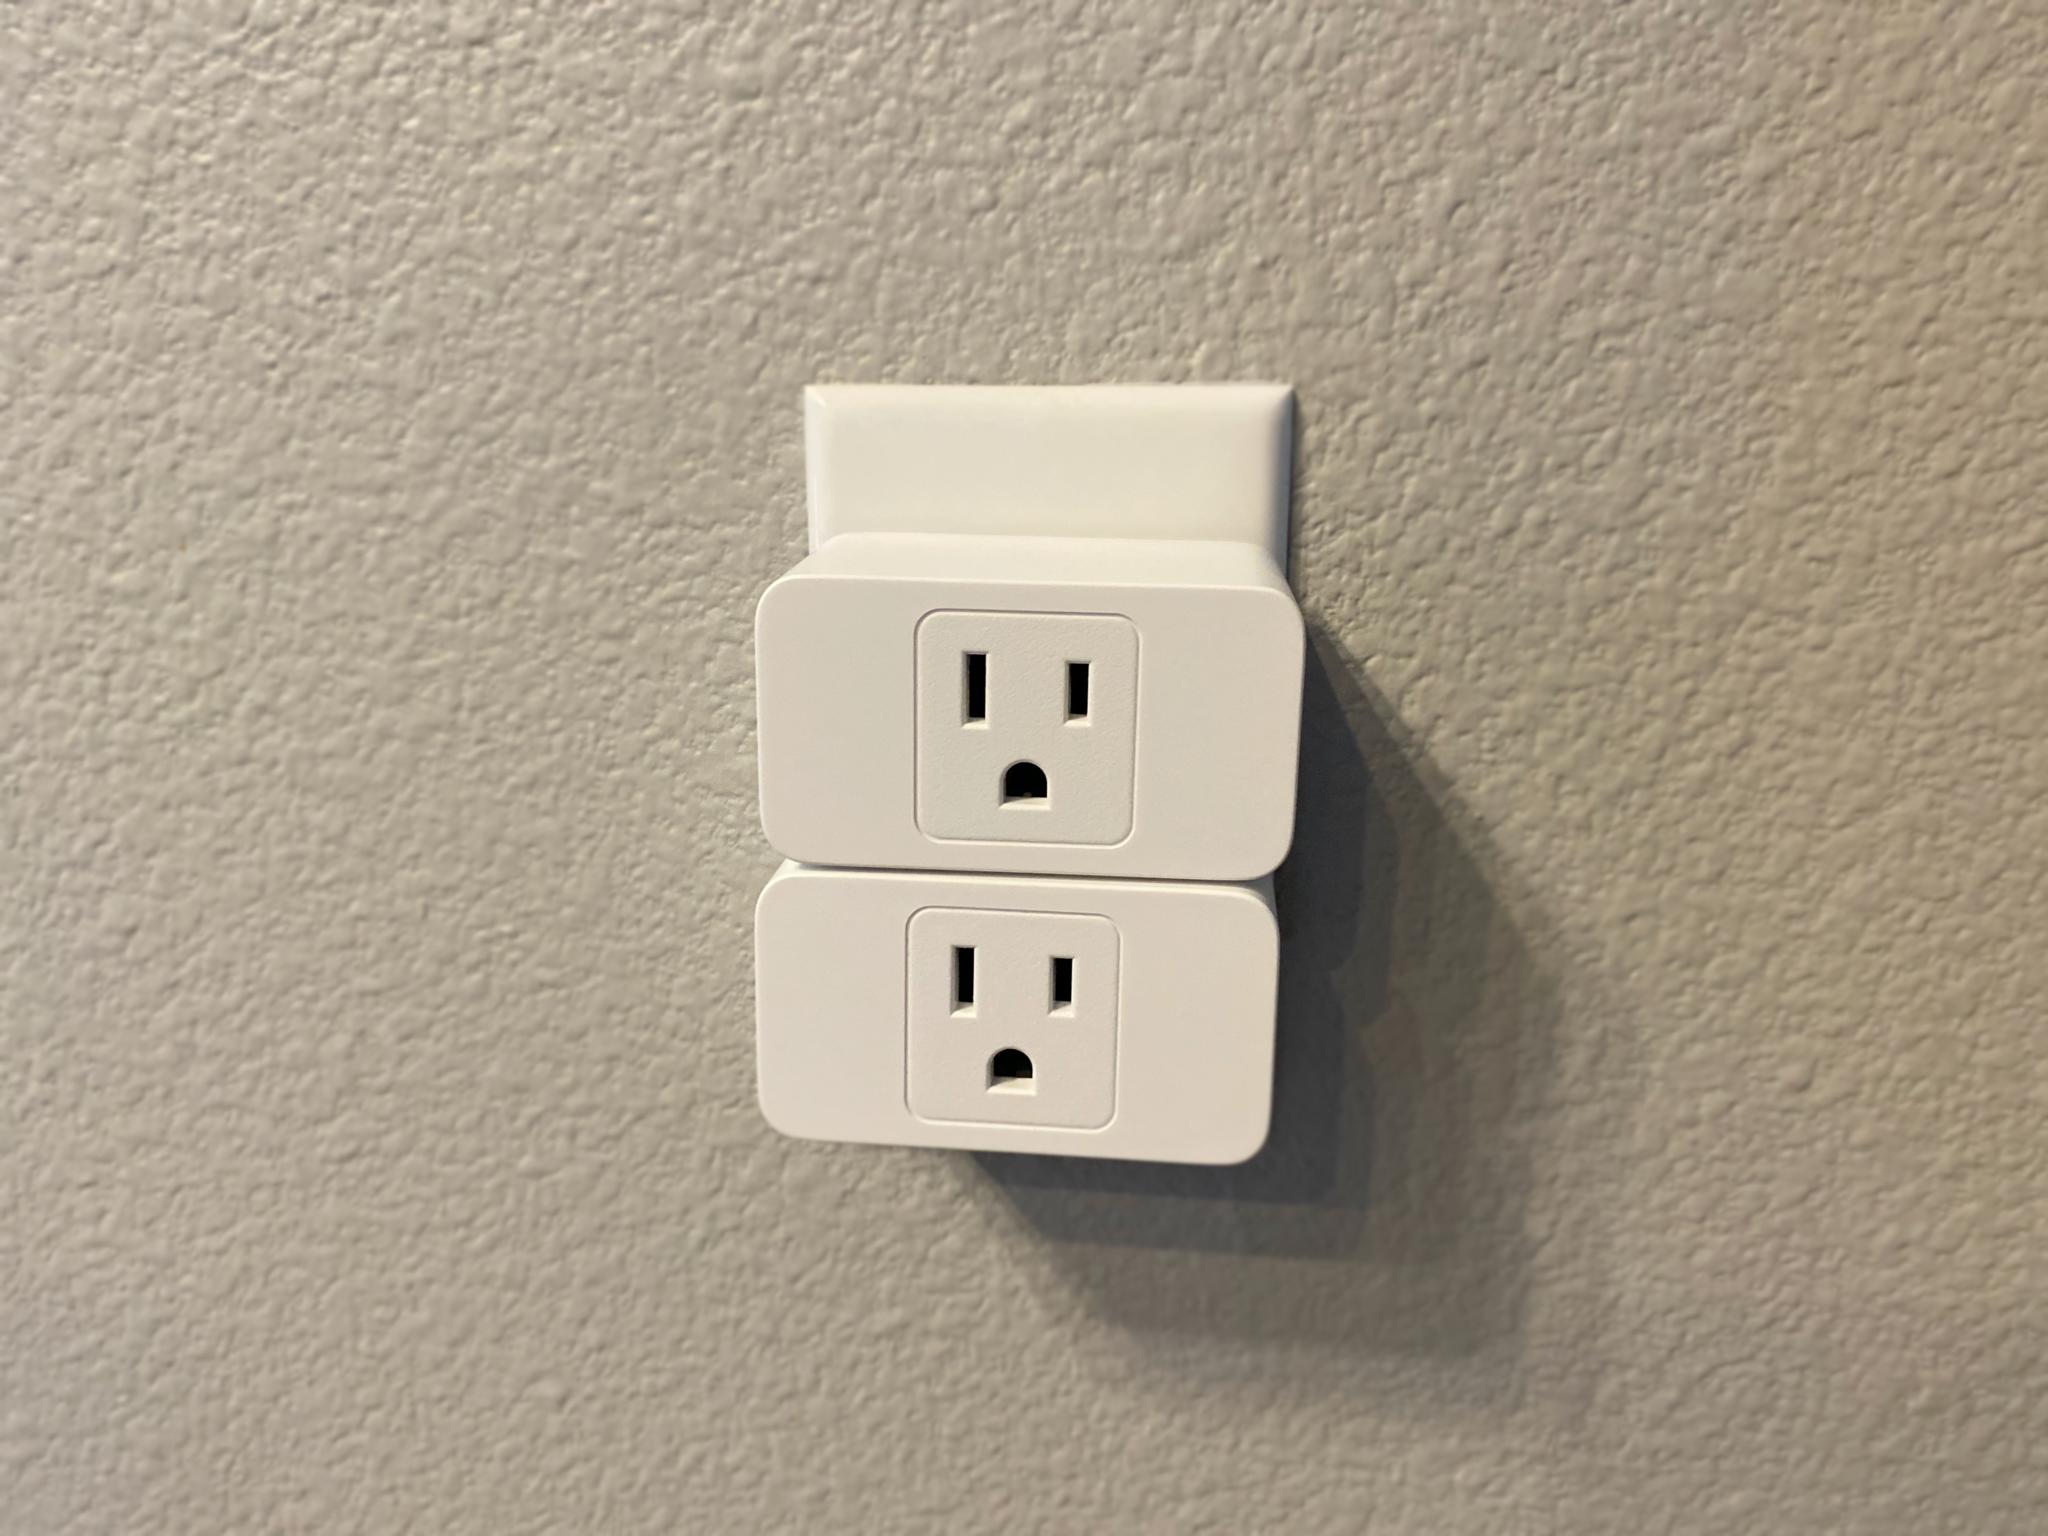 Two Meross Smart Wifi Plug Minis in the same outlet